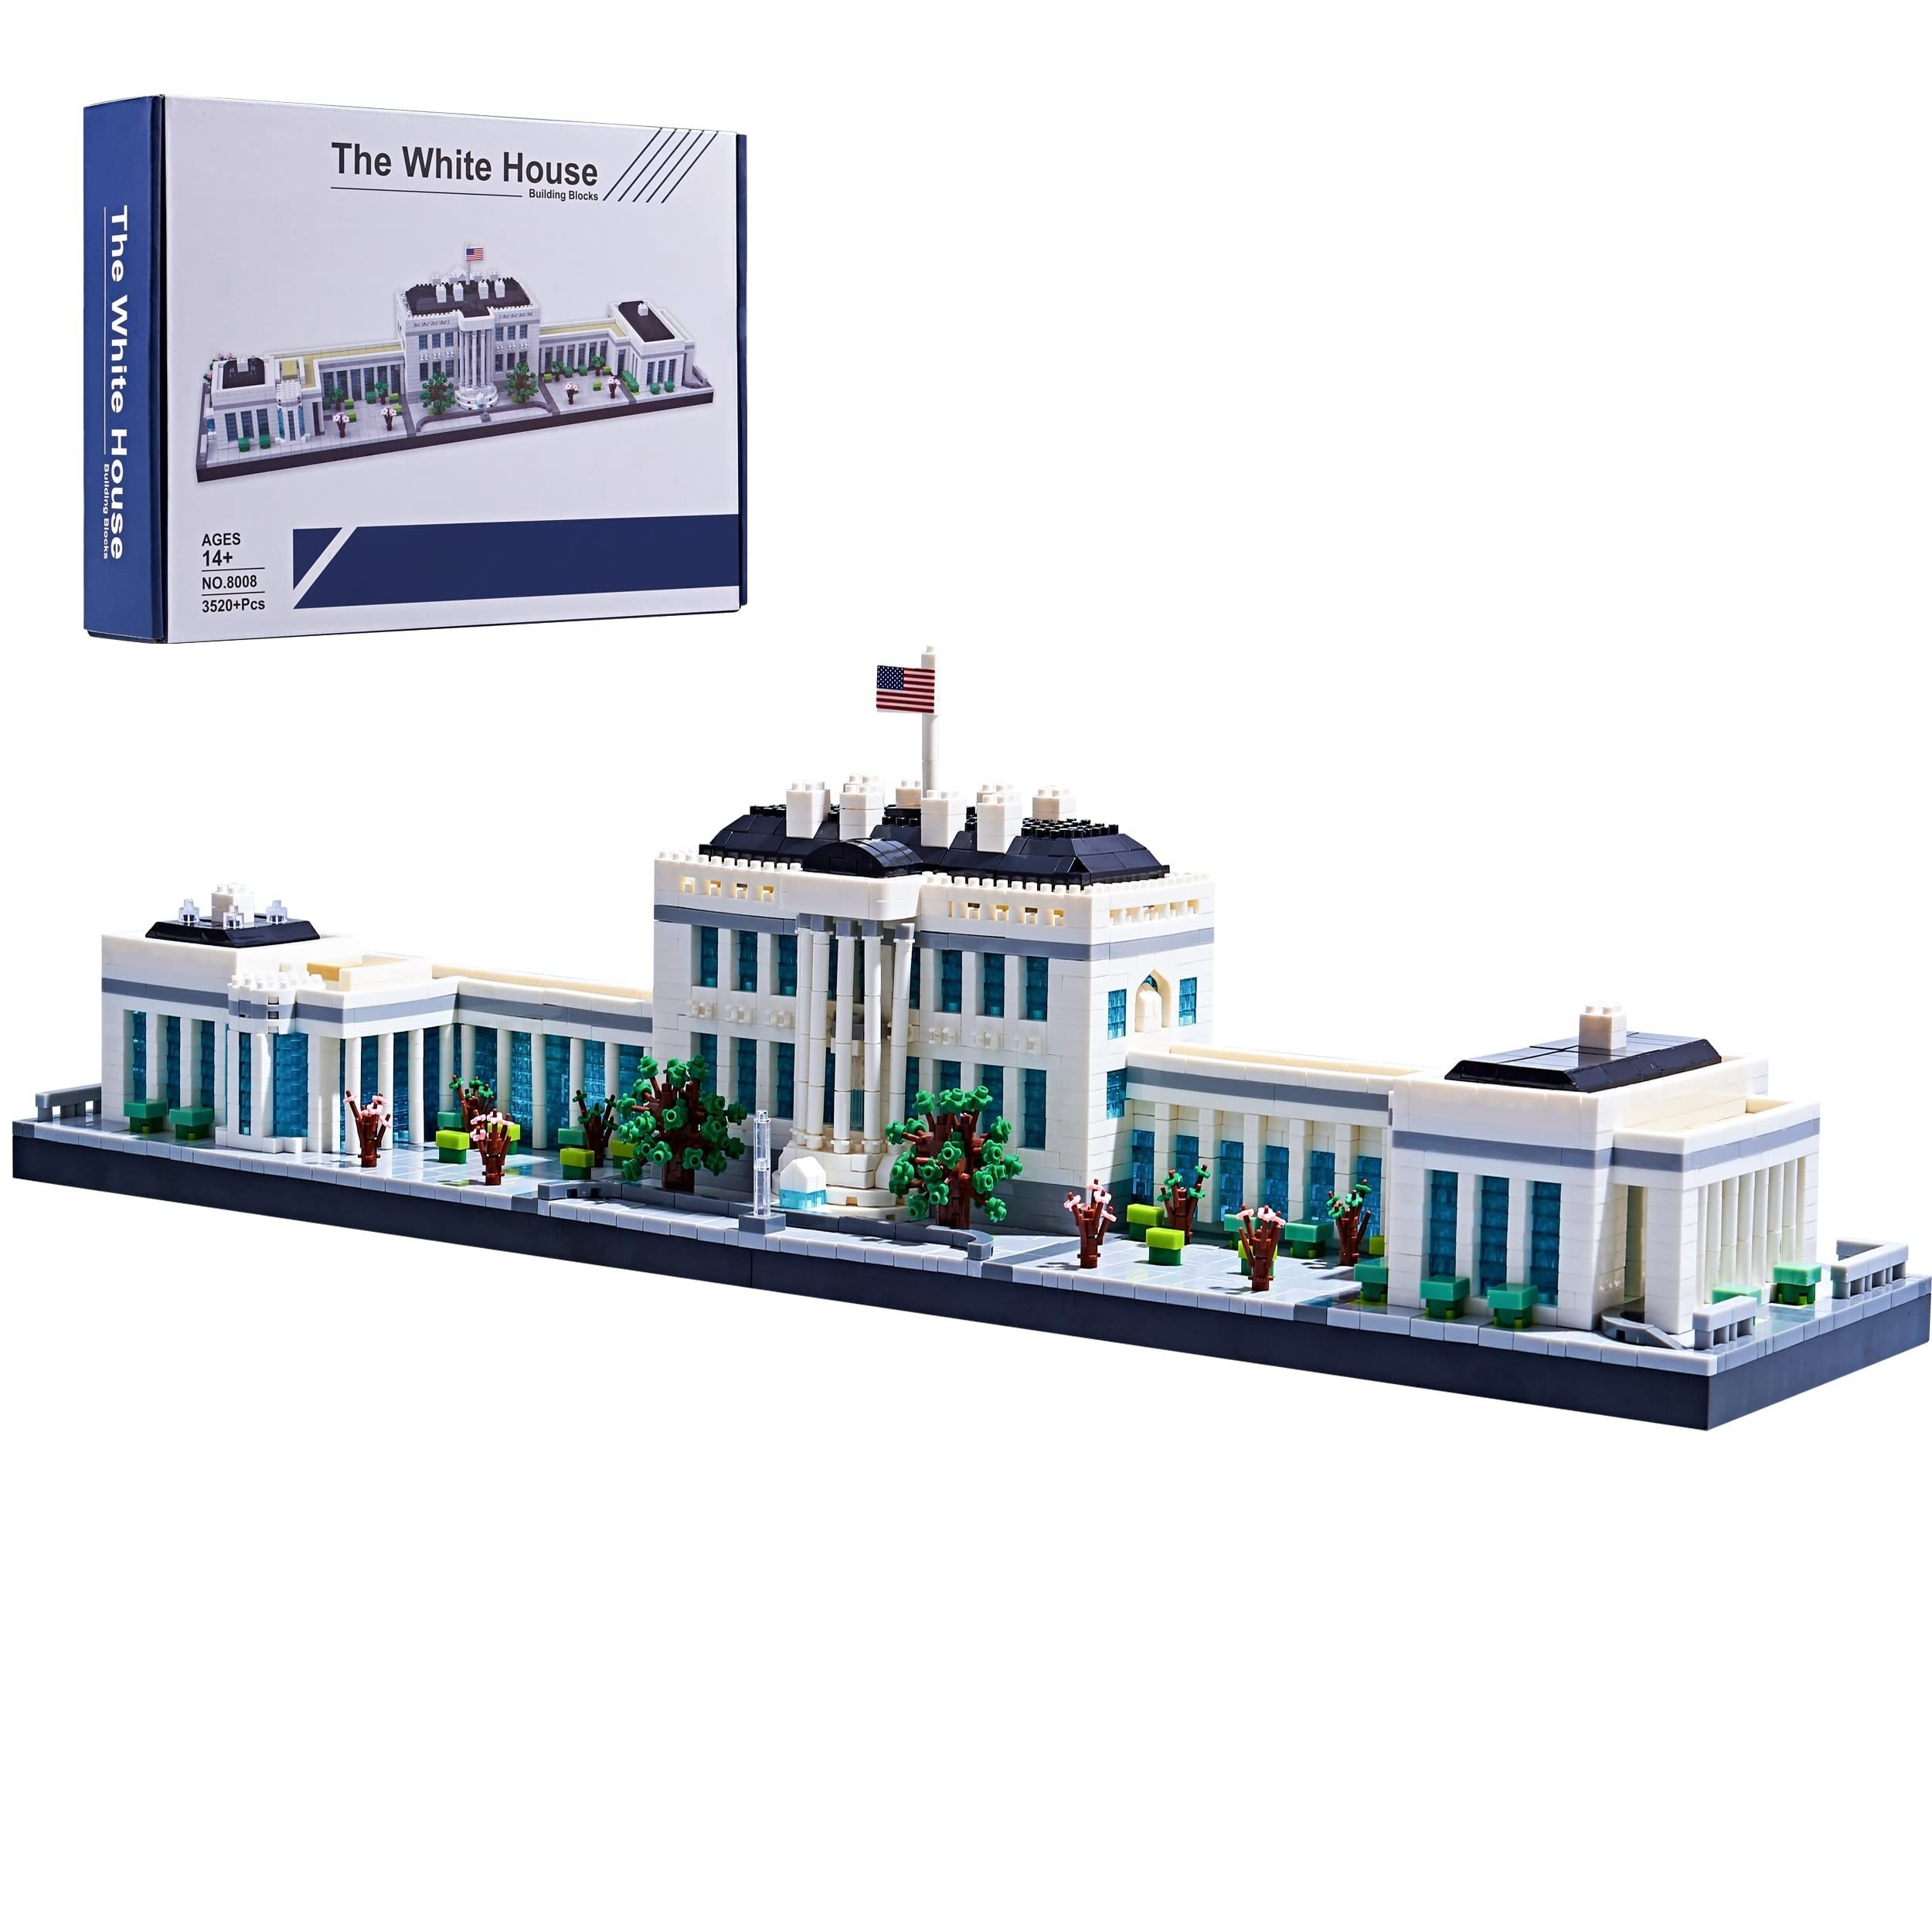 

White House Model Building Set - Joining Micro Building Blocks Kit 3520 Pieces - Famous Landmark Buildings And Architectural Toys Gifts